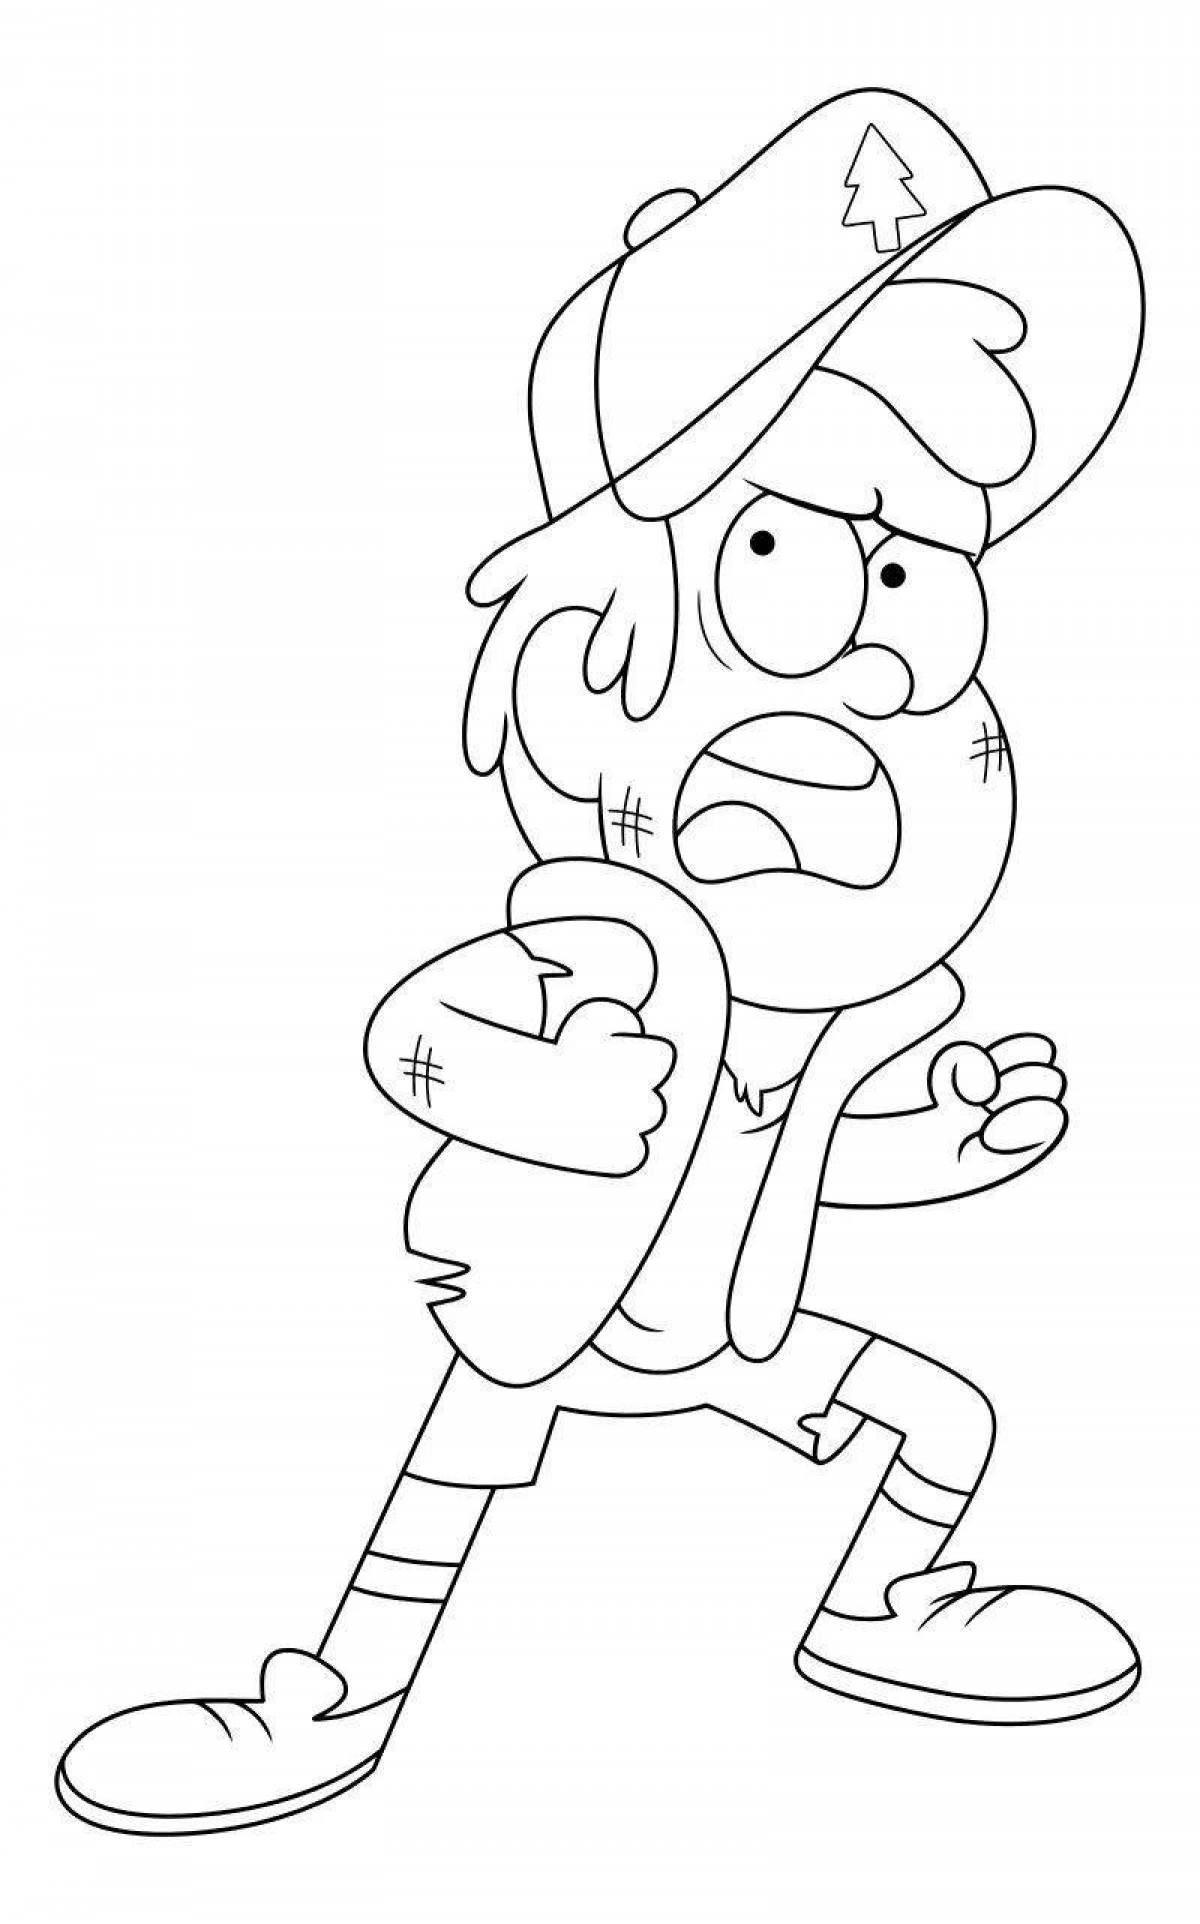 Dipper colorful coloring page